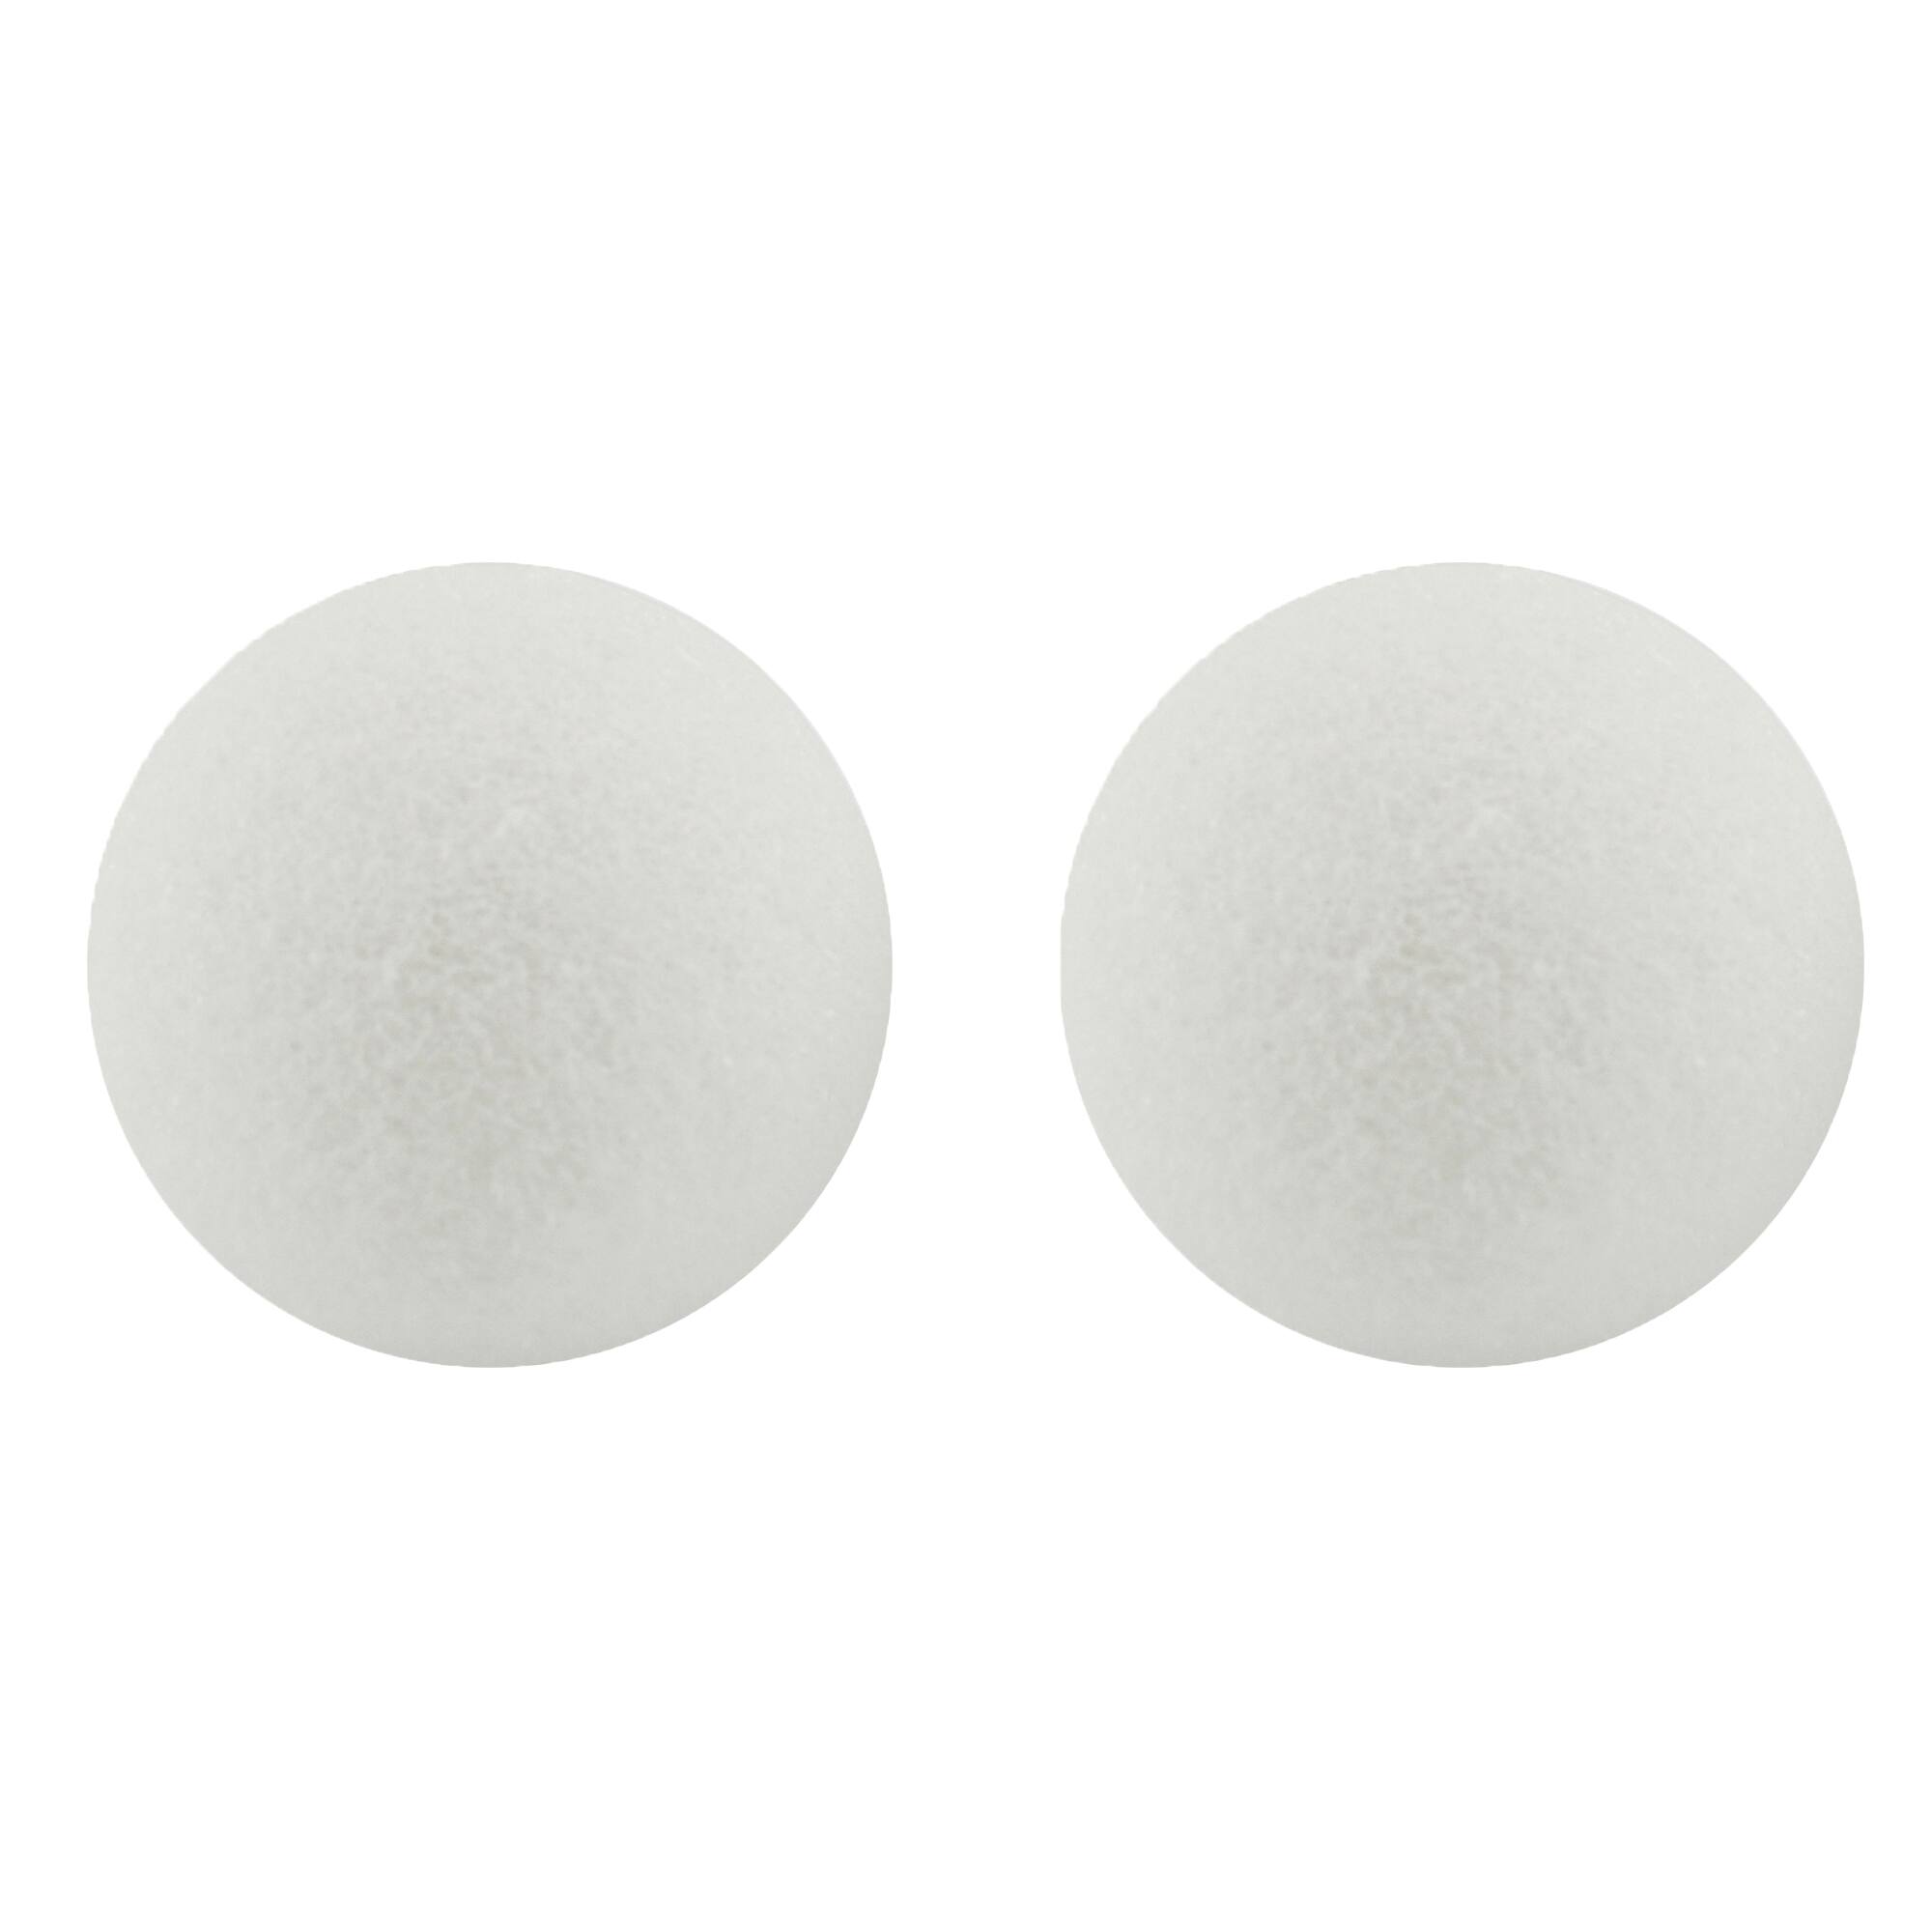 4 Inch Hygloss Products White Styrofoam Balls for Arts and Crafts 12 Pack 